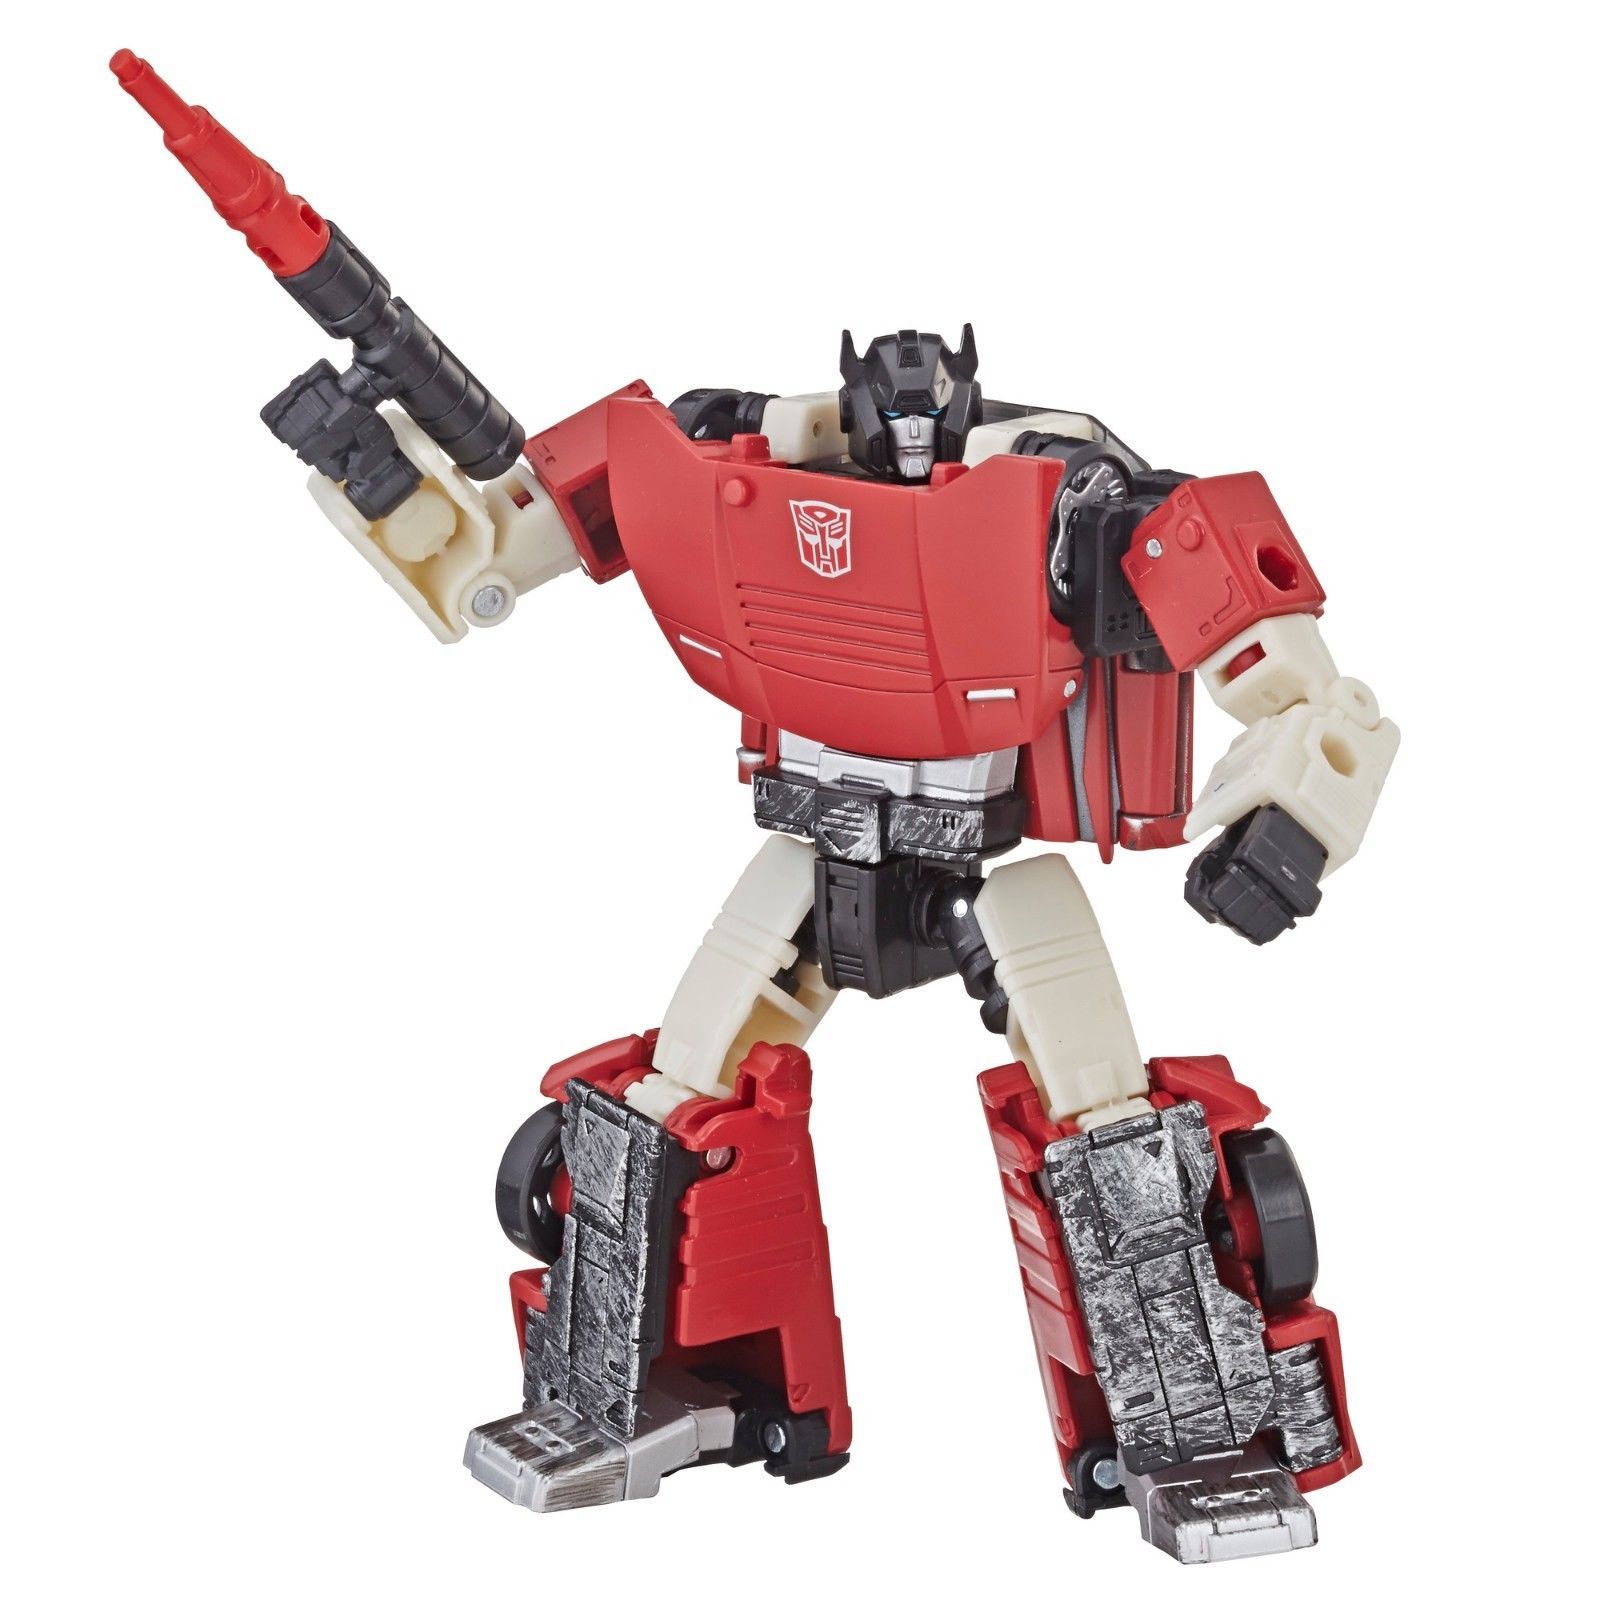 Transformers Generations War For Cybertron: Siege Deluxe Sideswipe Action Figure WFC-S7